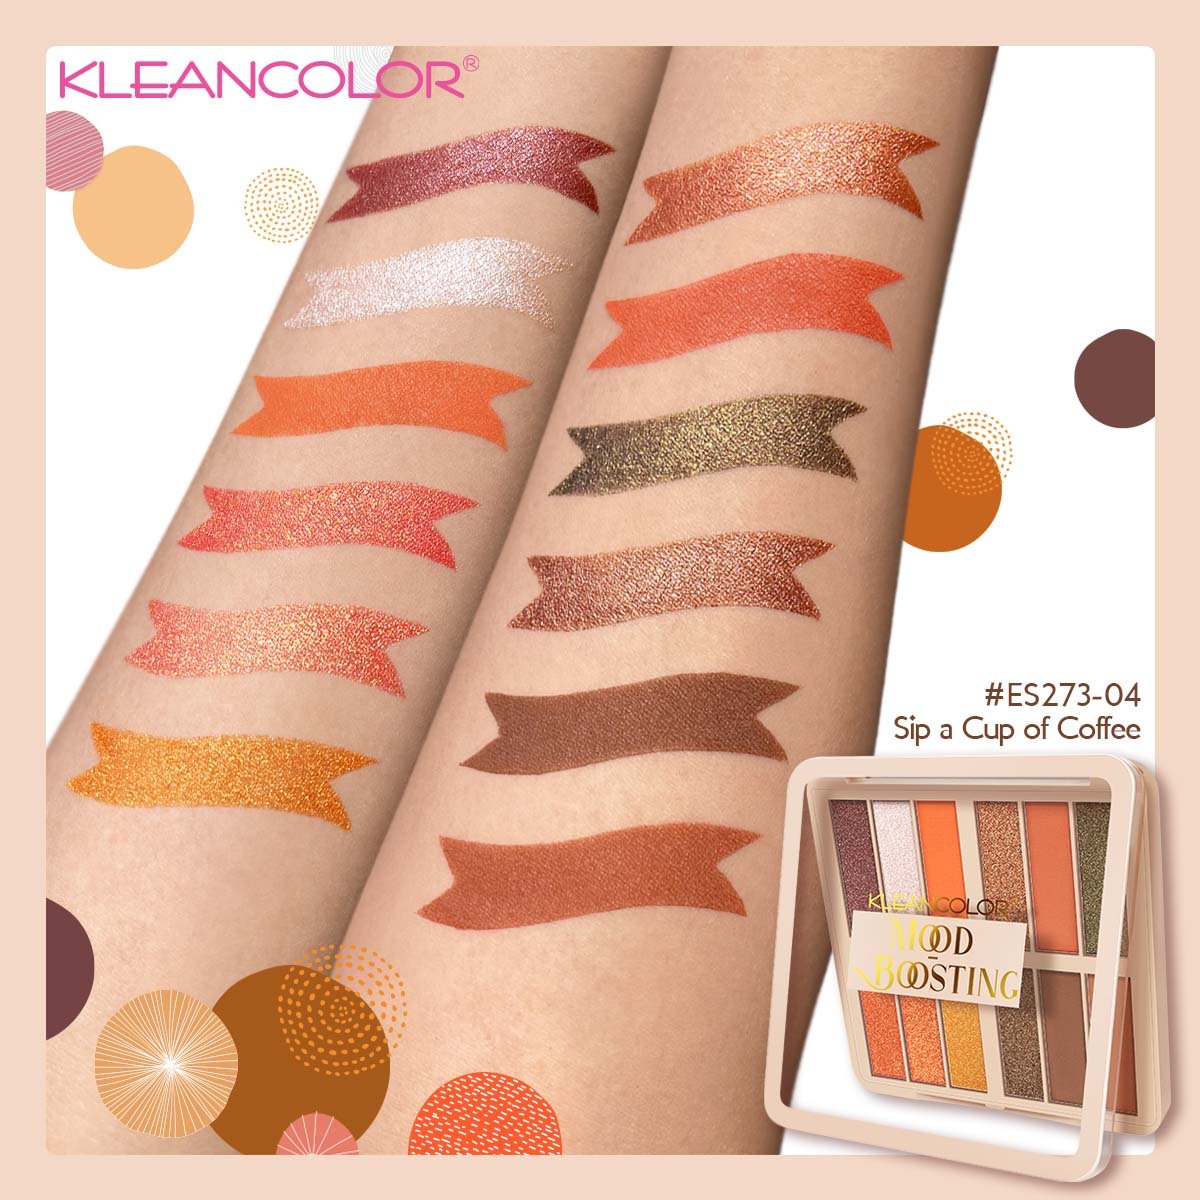 Kleancolor - Mood Boosting Pressed Pigment Palette Sip a Cup of Coffee